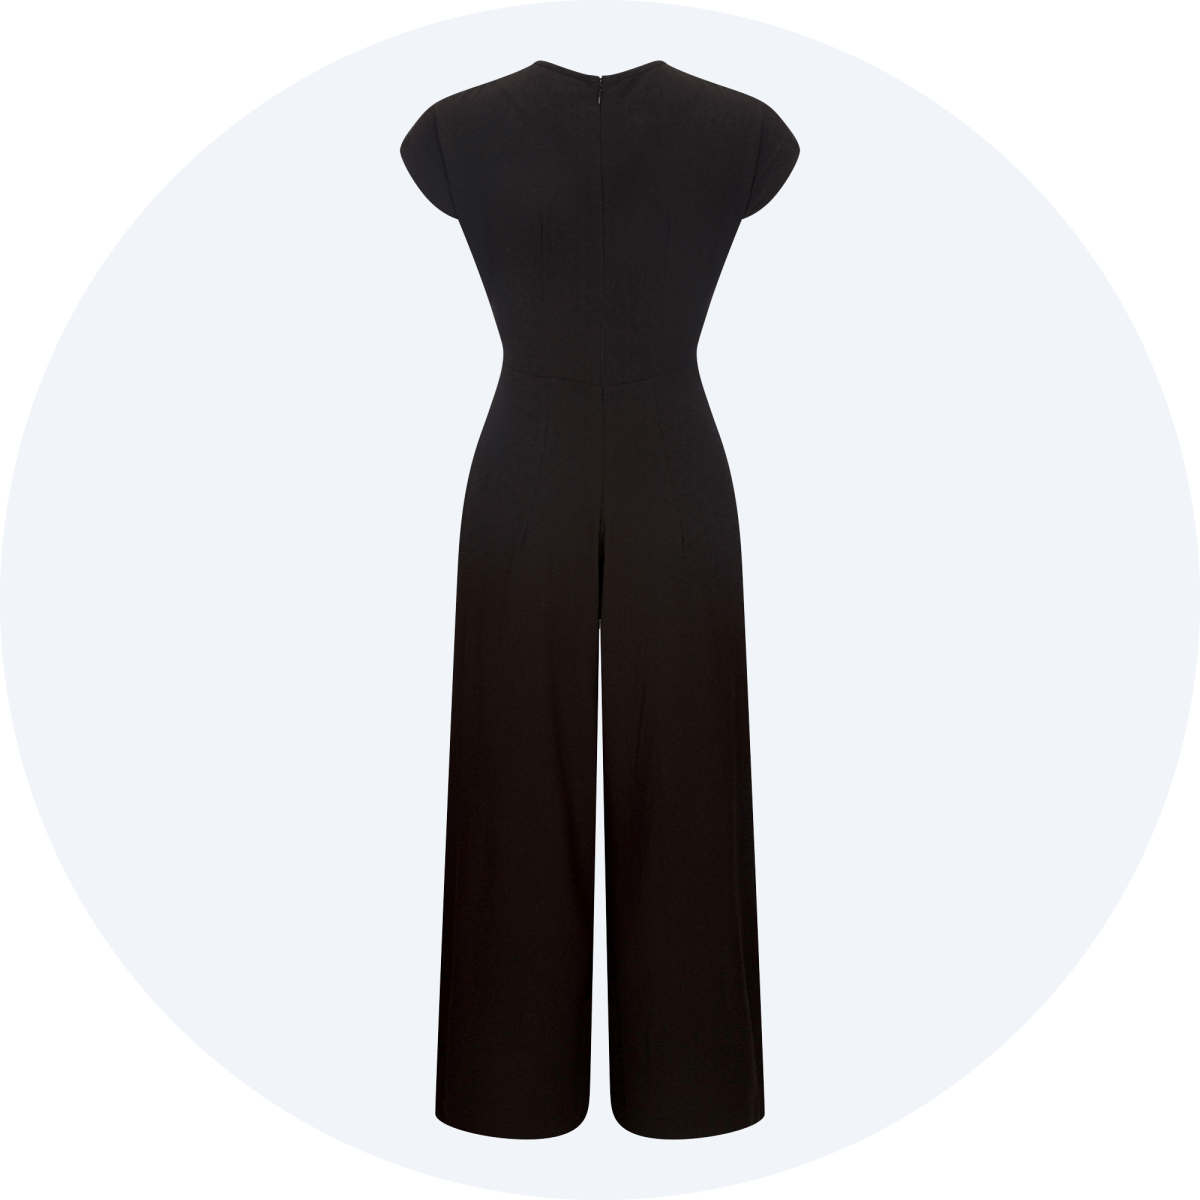 Retro Style Trouser Suit, Mayfair Jumpsuit in black, ghost photography full length product picture of the back.